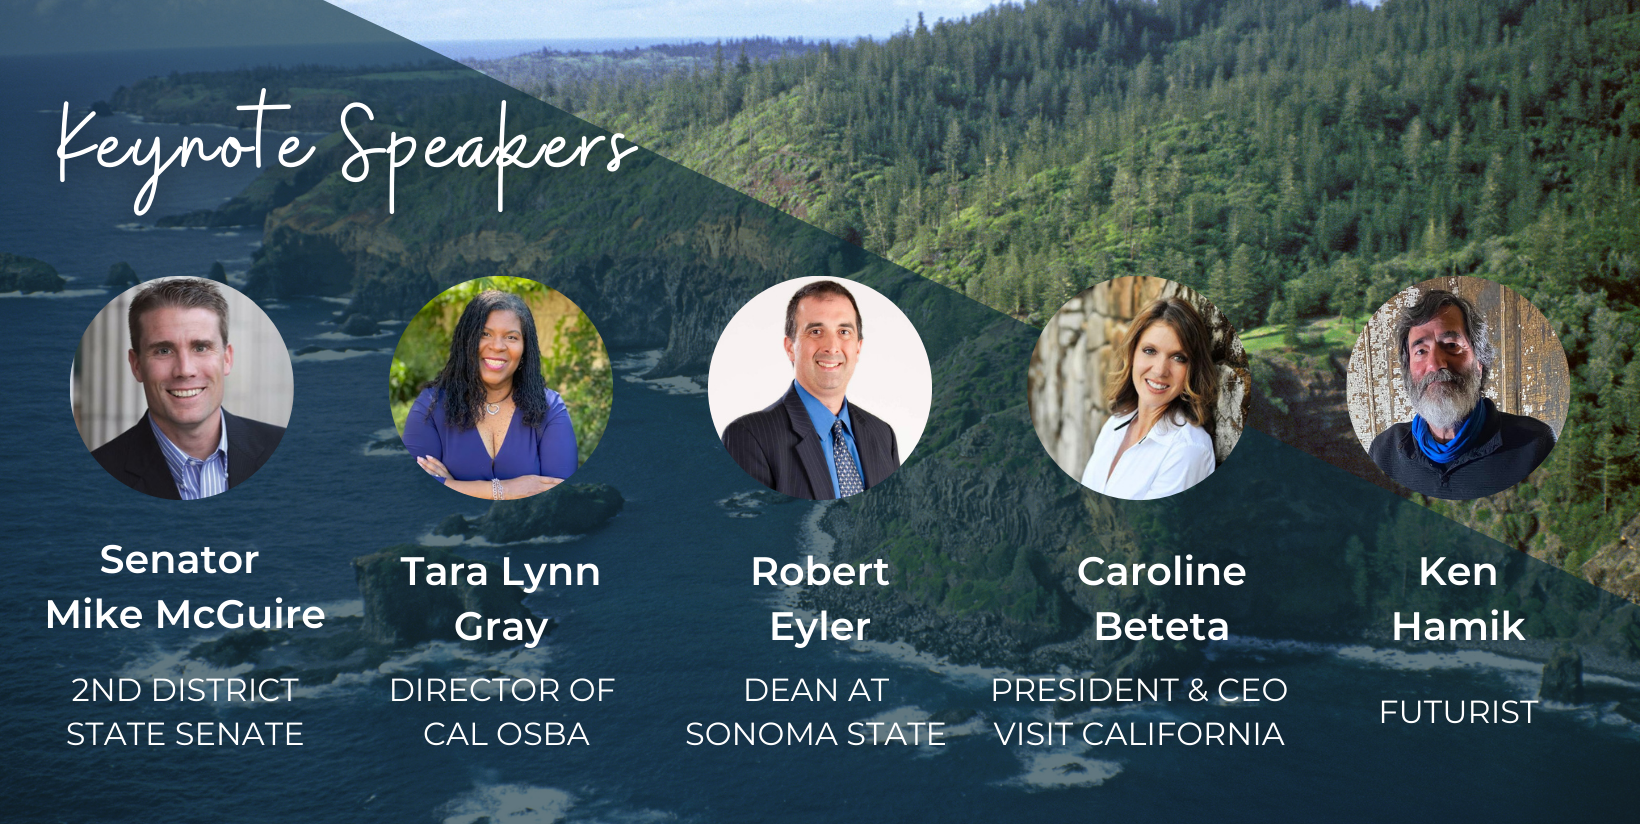 Keynote Speakers Senator Mike McGuire Tara Lynn Gray, California Office of Small Business Advocacy Robert Eyler, Dean of the School of Extended and International Education at Sonoma State University Caroline Beteta, President and CEO of Visit California 